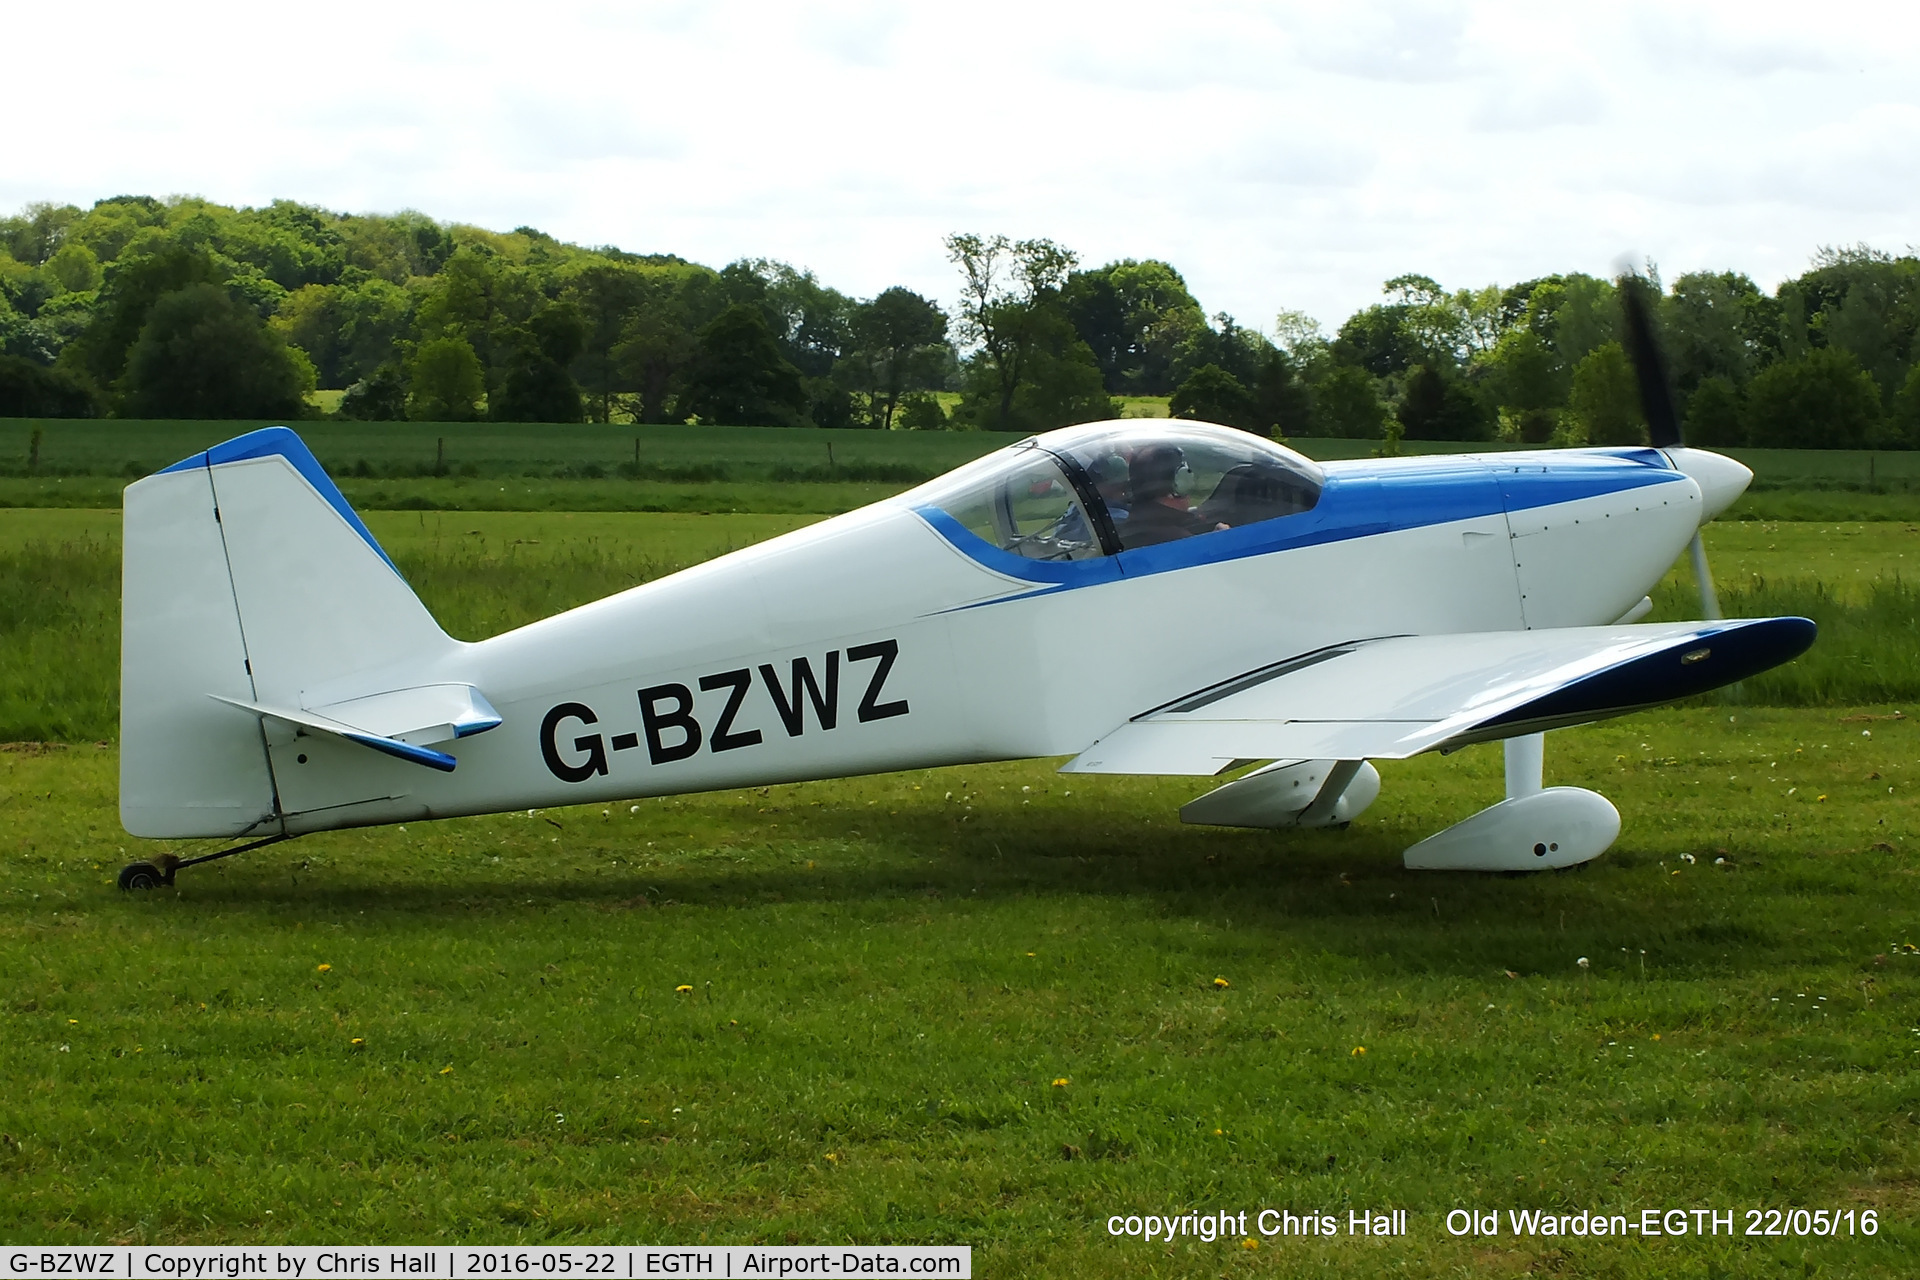 G-BZWZ, 2003 Van's RV-6 C/N PFA 181A-13419, 70th Anniversary of the first flight of the de Havilland Chipmunk  Fly-In at Old Warden